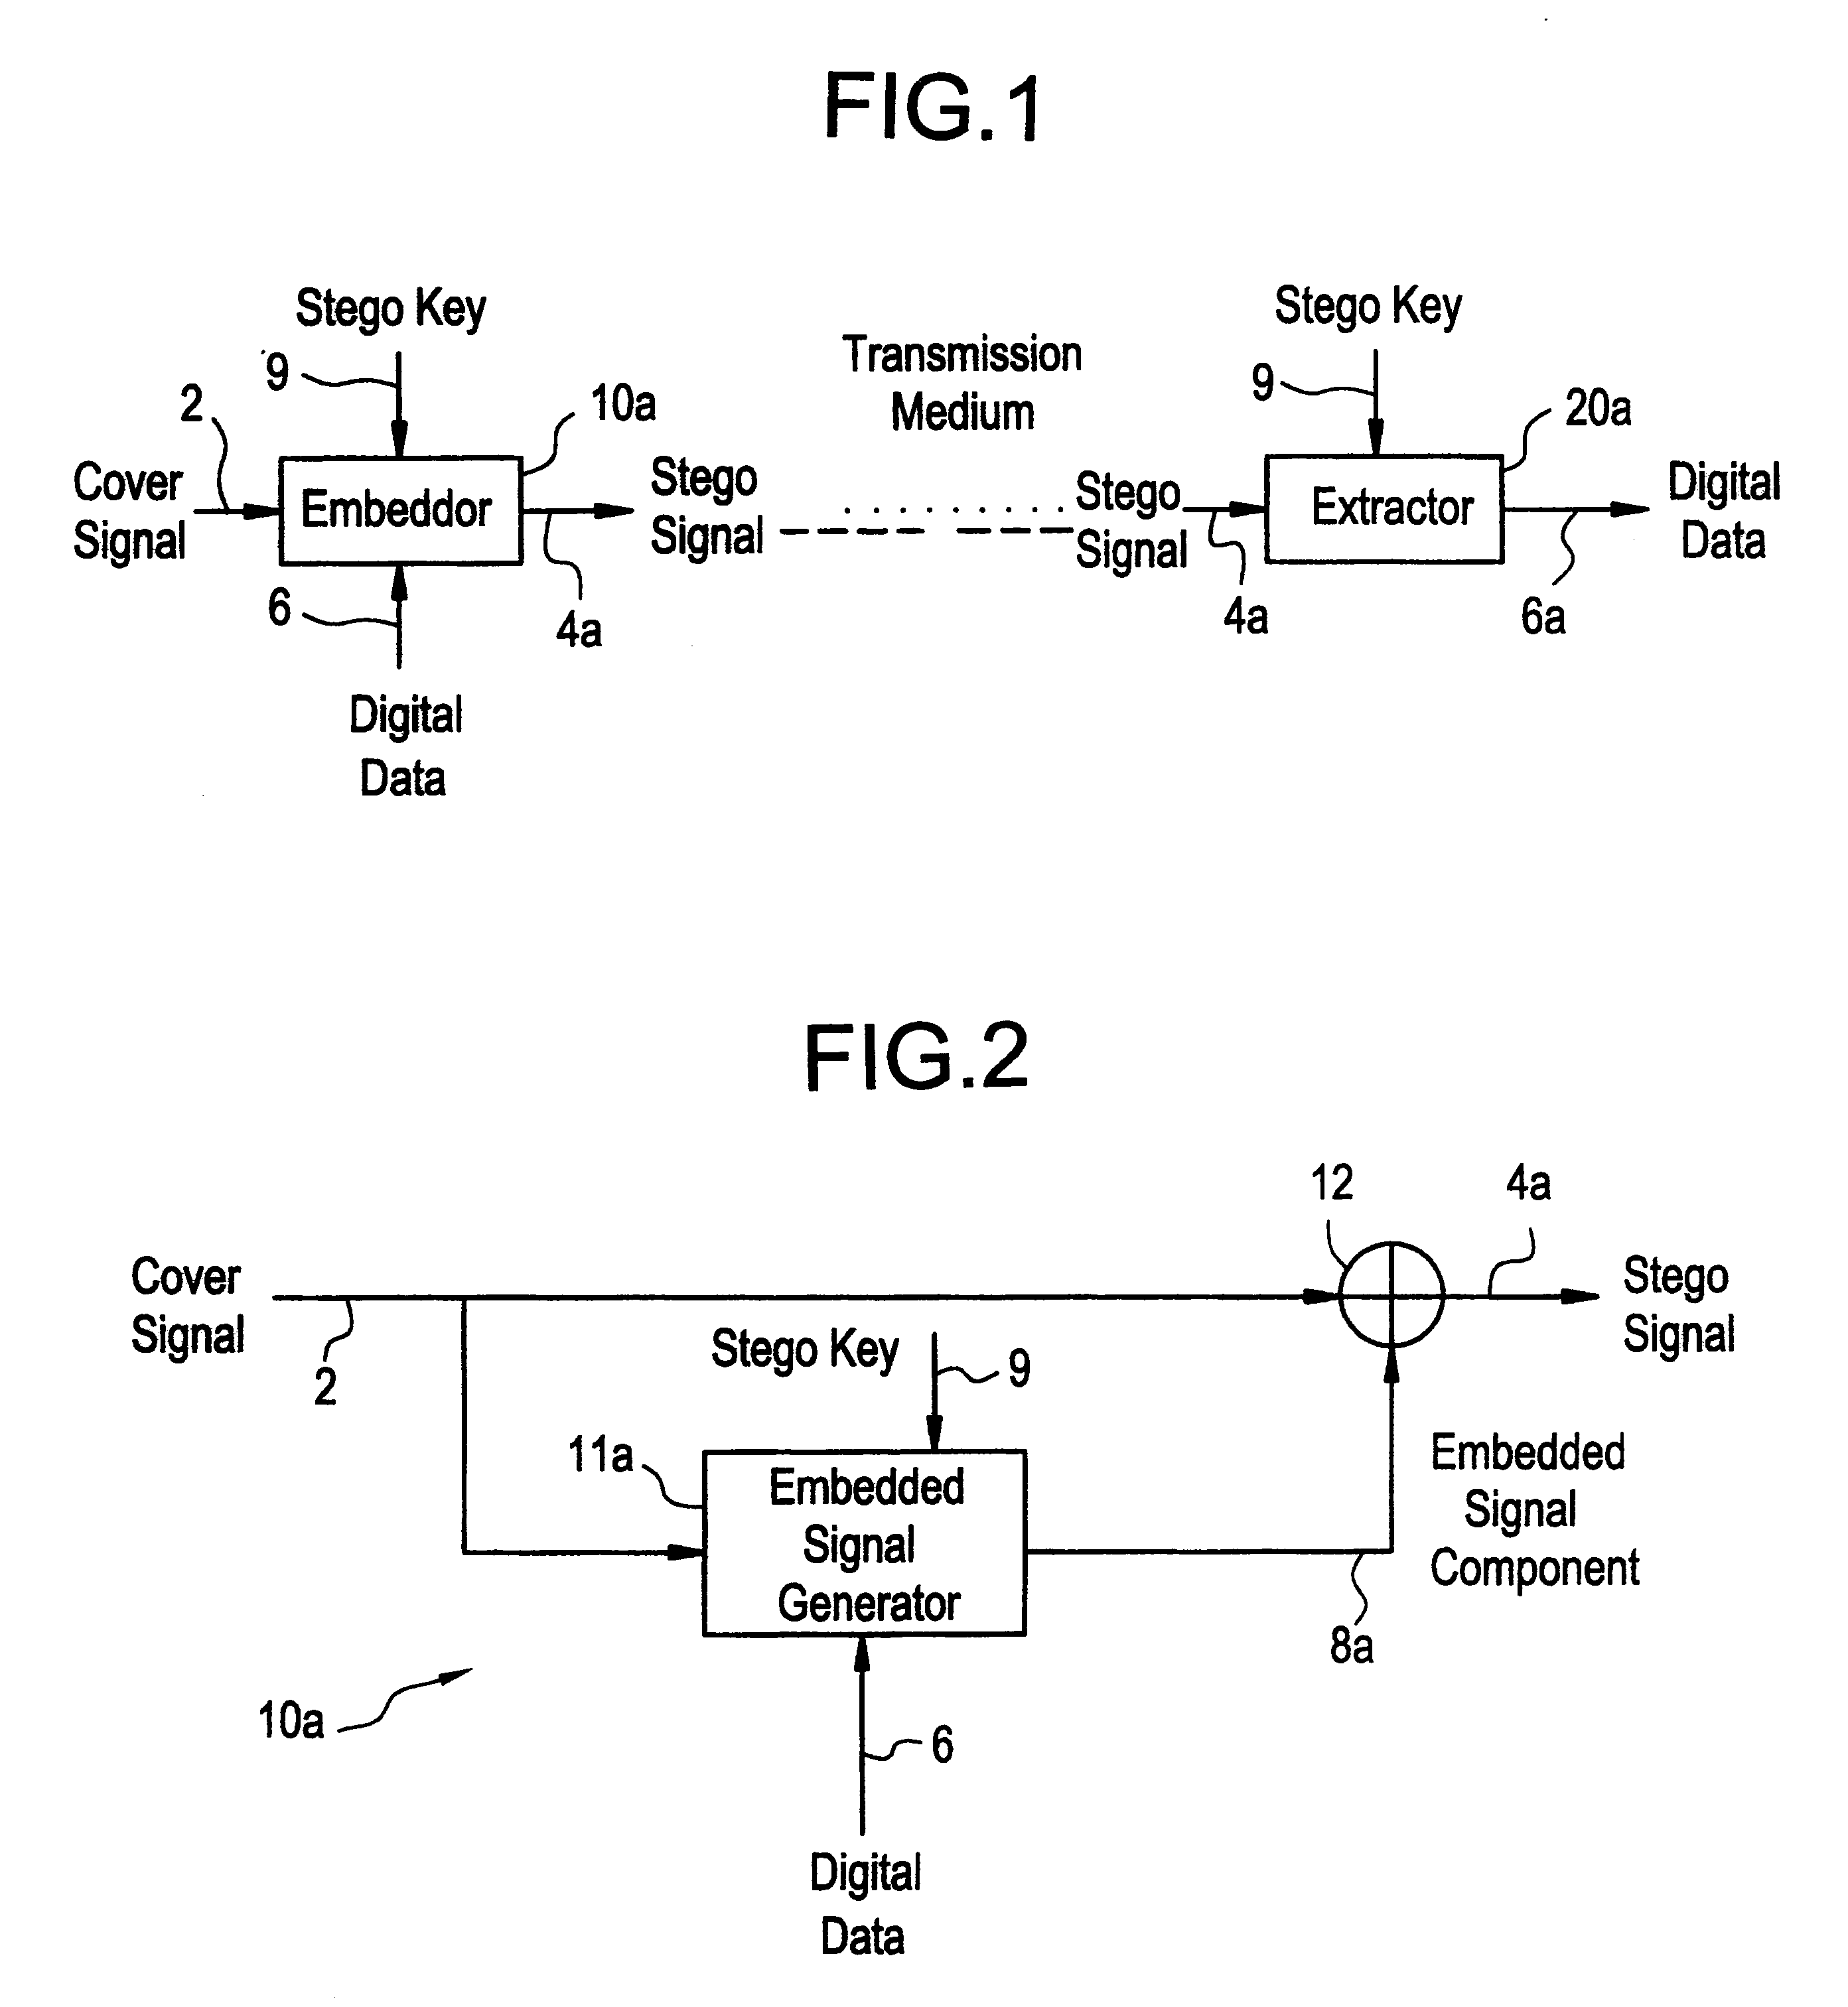 Apparatus and method for embedding and extracting information in analog signals using distributed signal features